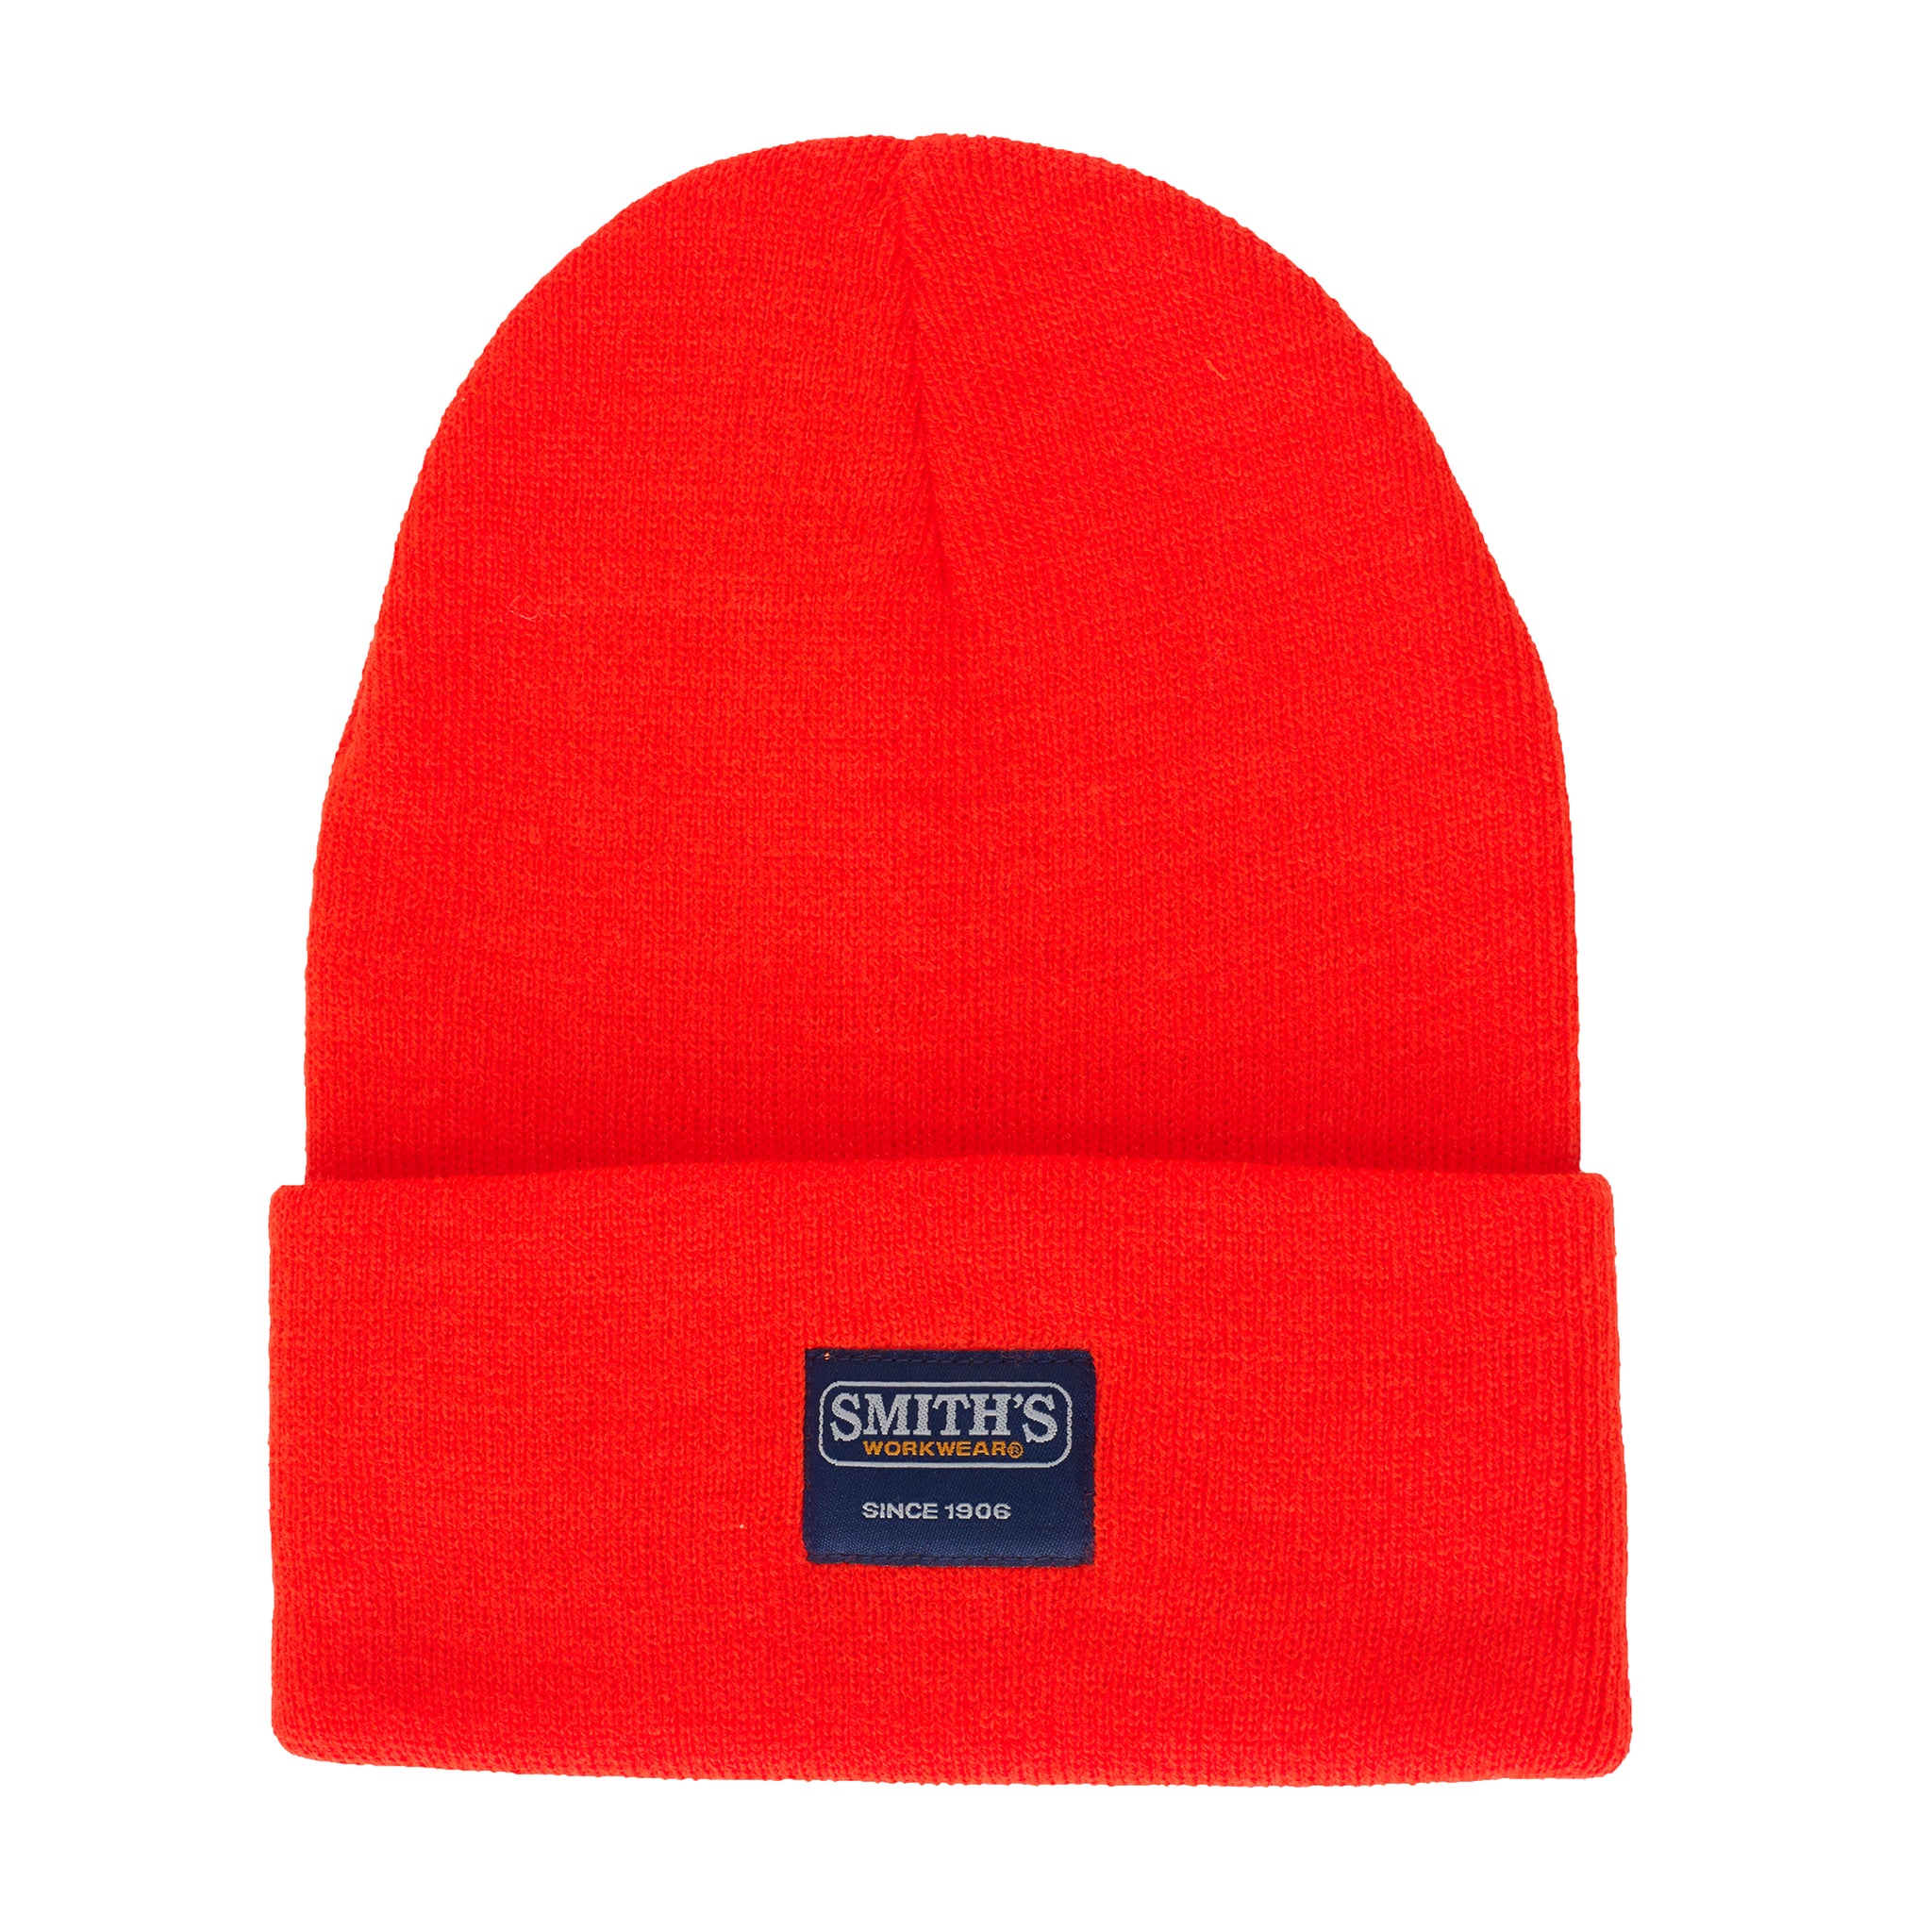 PULL-ON KNIT BEANIE